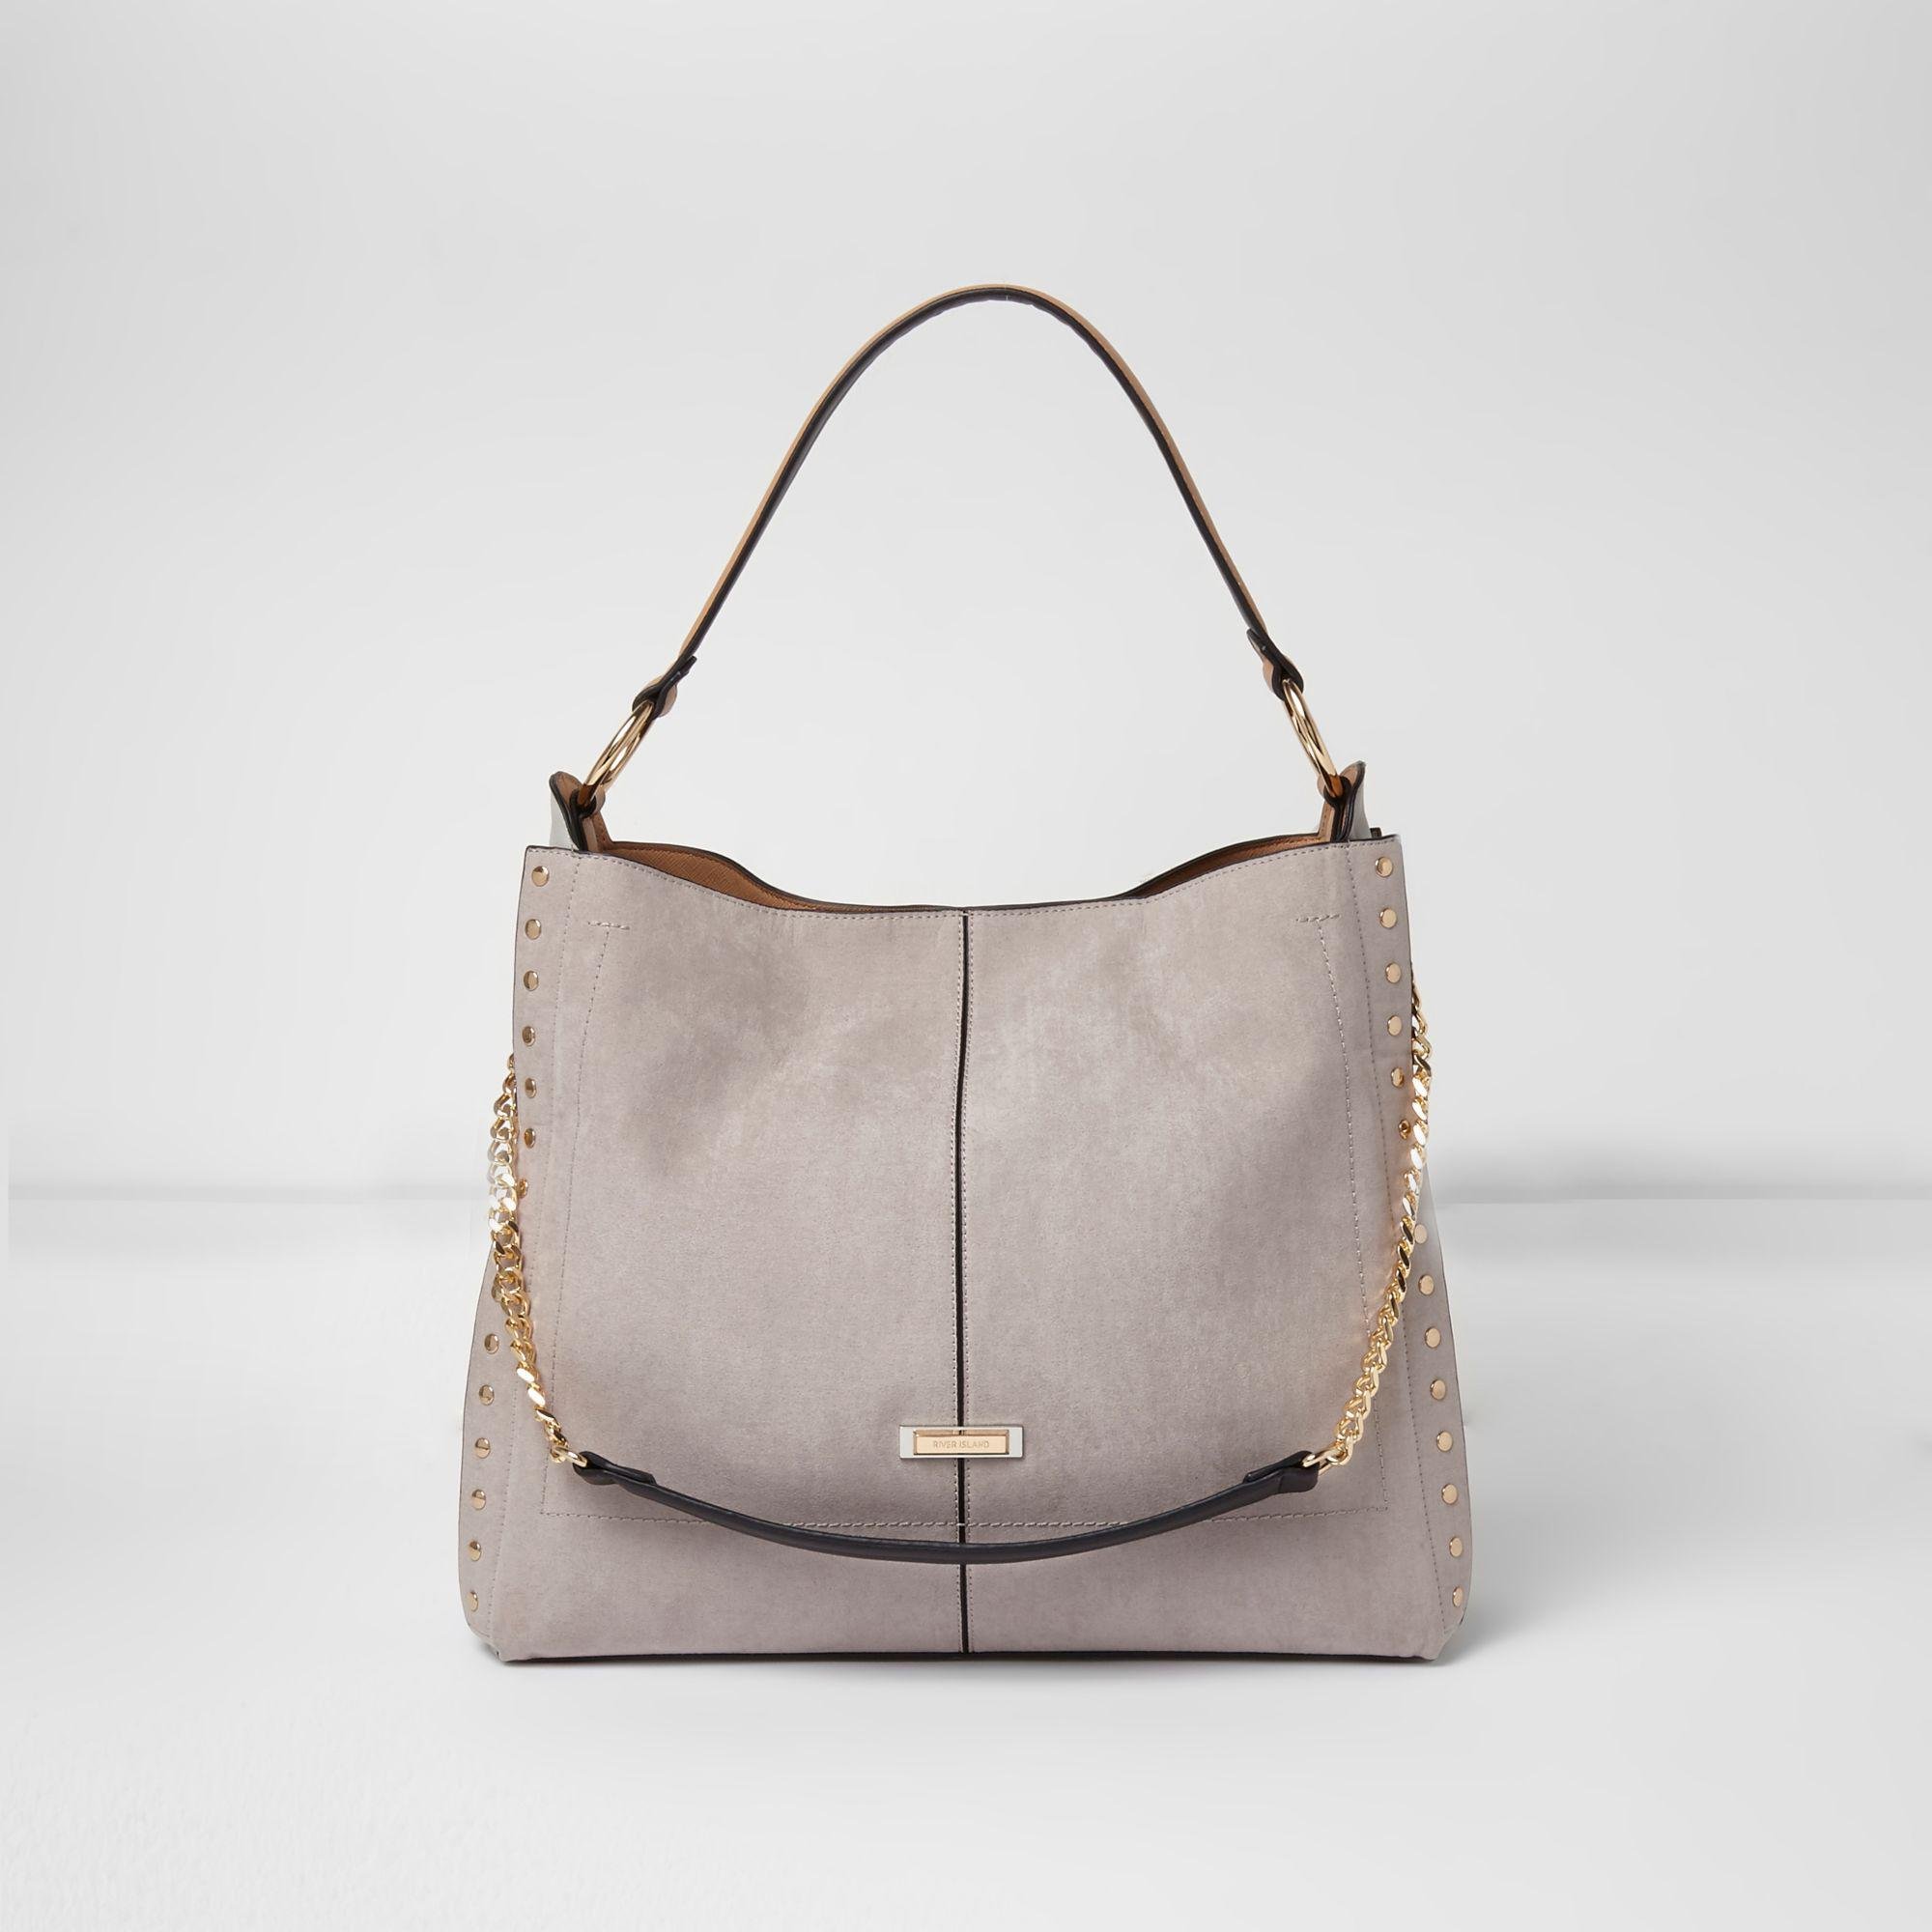 River Island Studded Chain Handle Slouch Bag in Grey (Grey) - Lyst